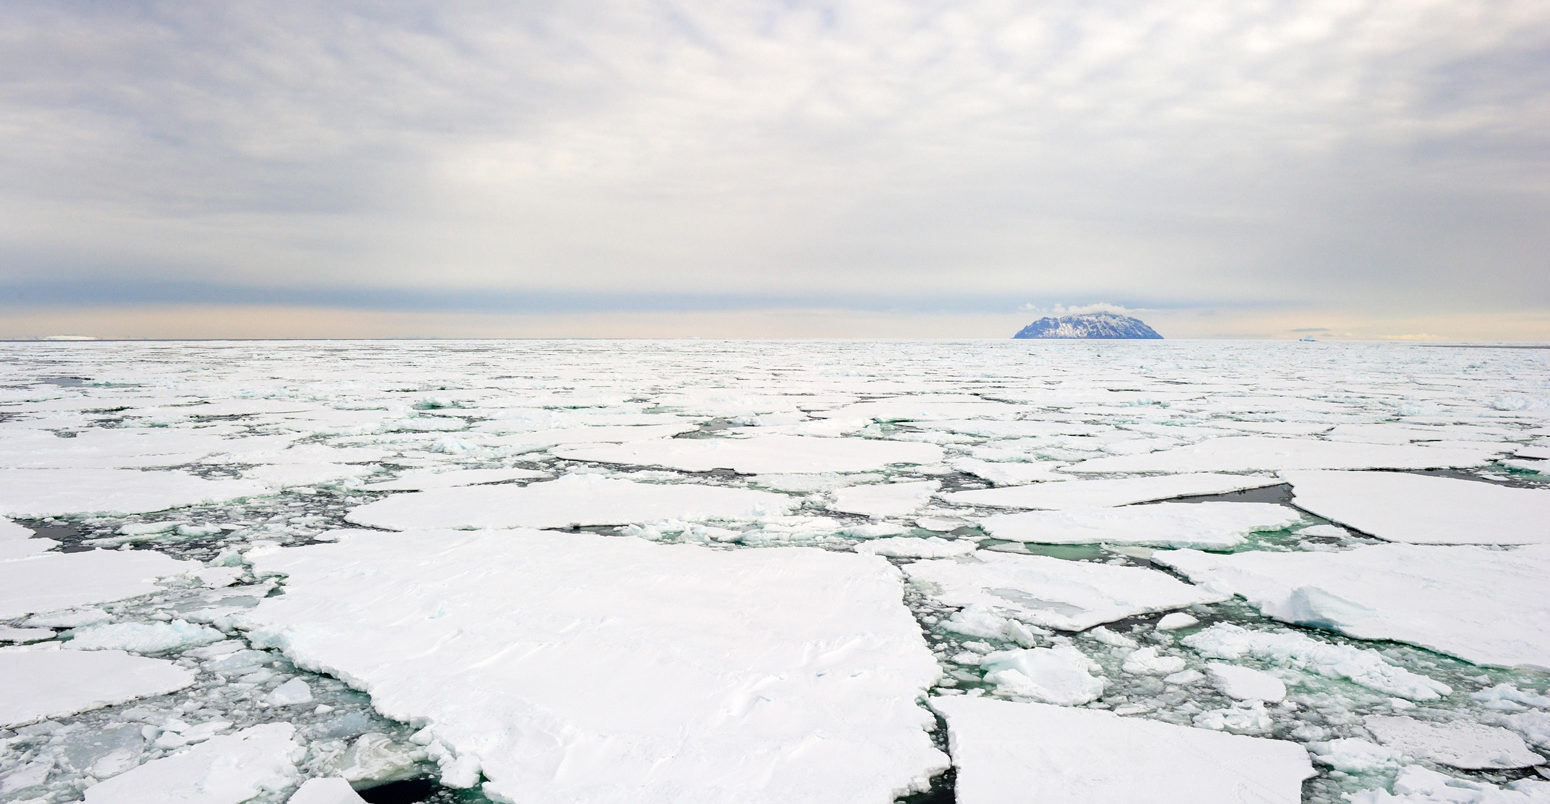 Small island in the Ross Sea, Antarctica, with pack ice in the foreground